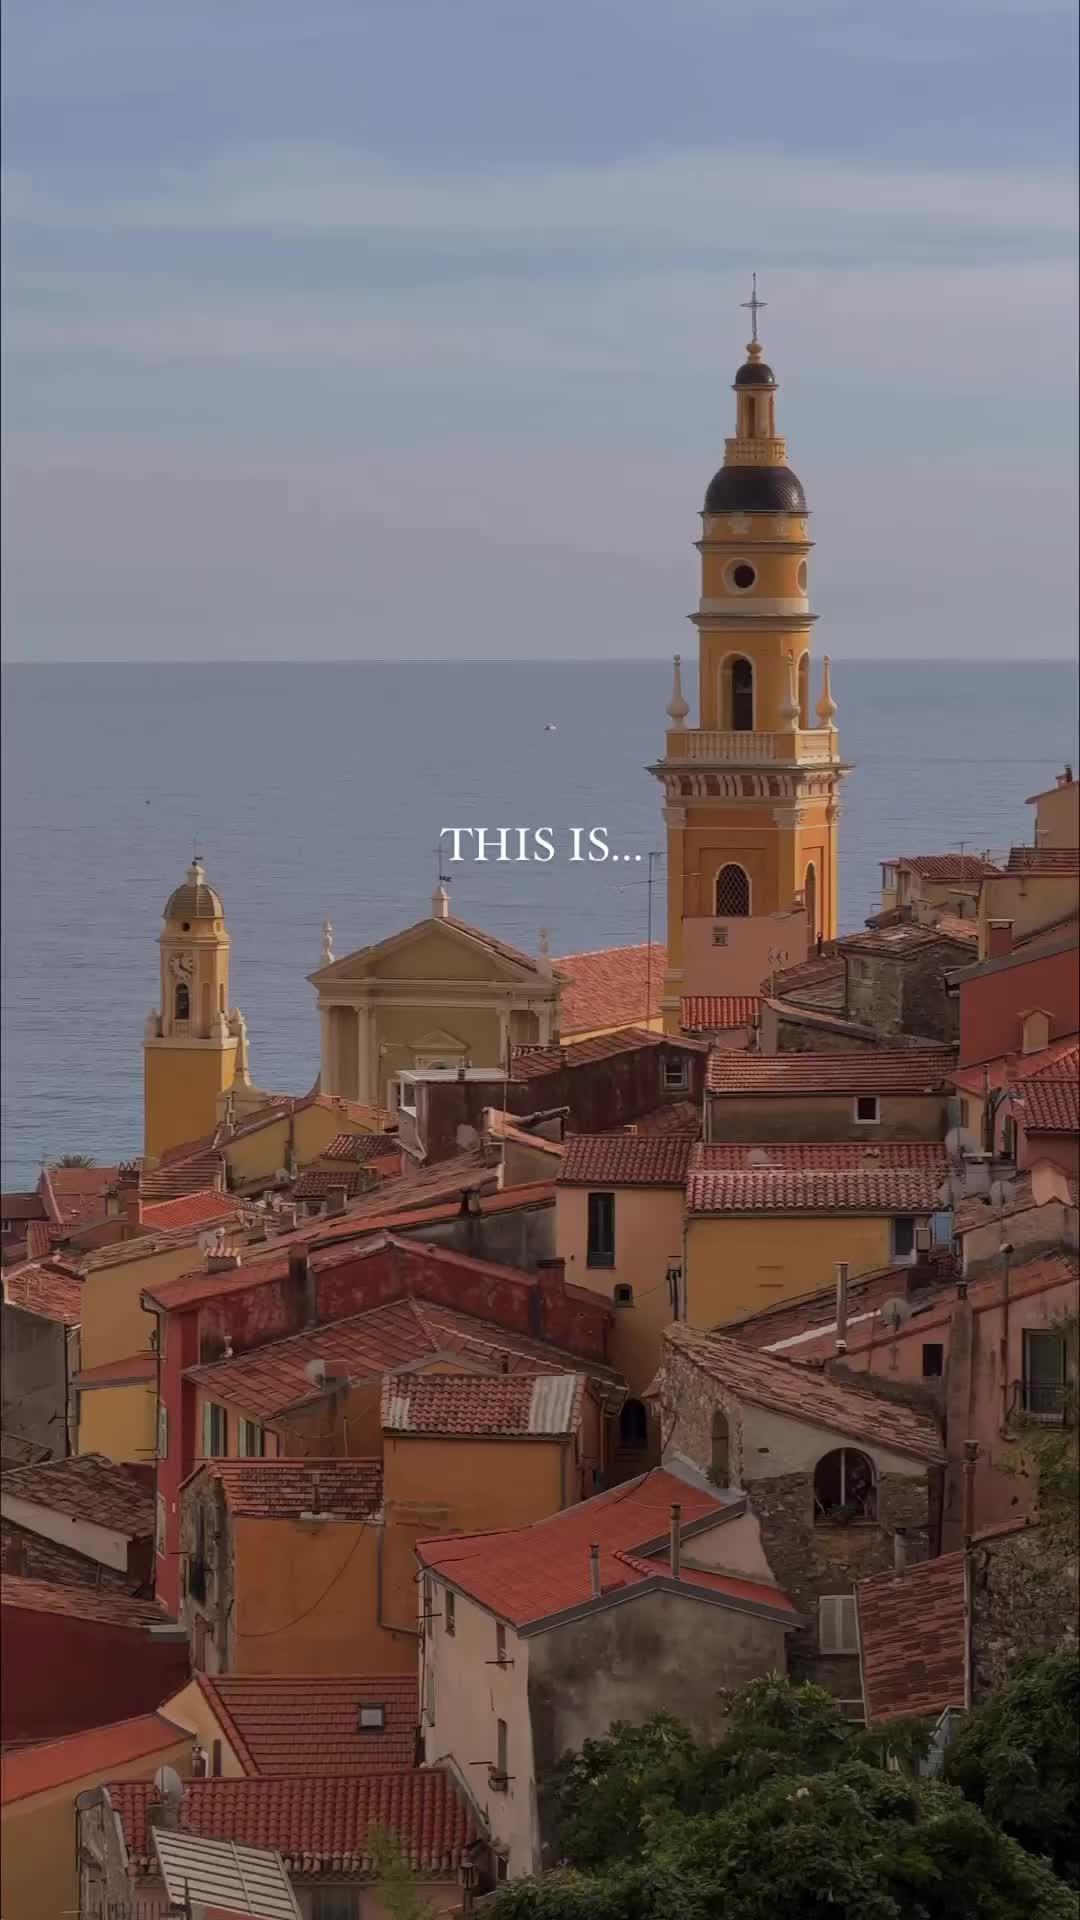 Short Travel Guide to Menton, France: Top Attractions